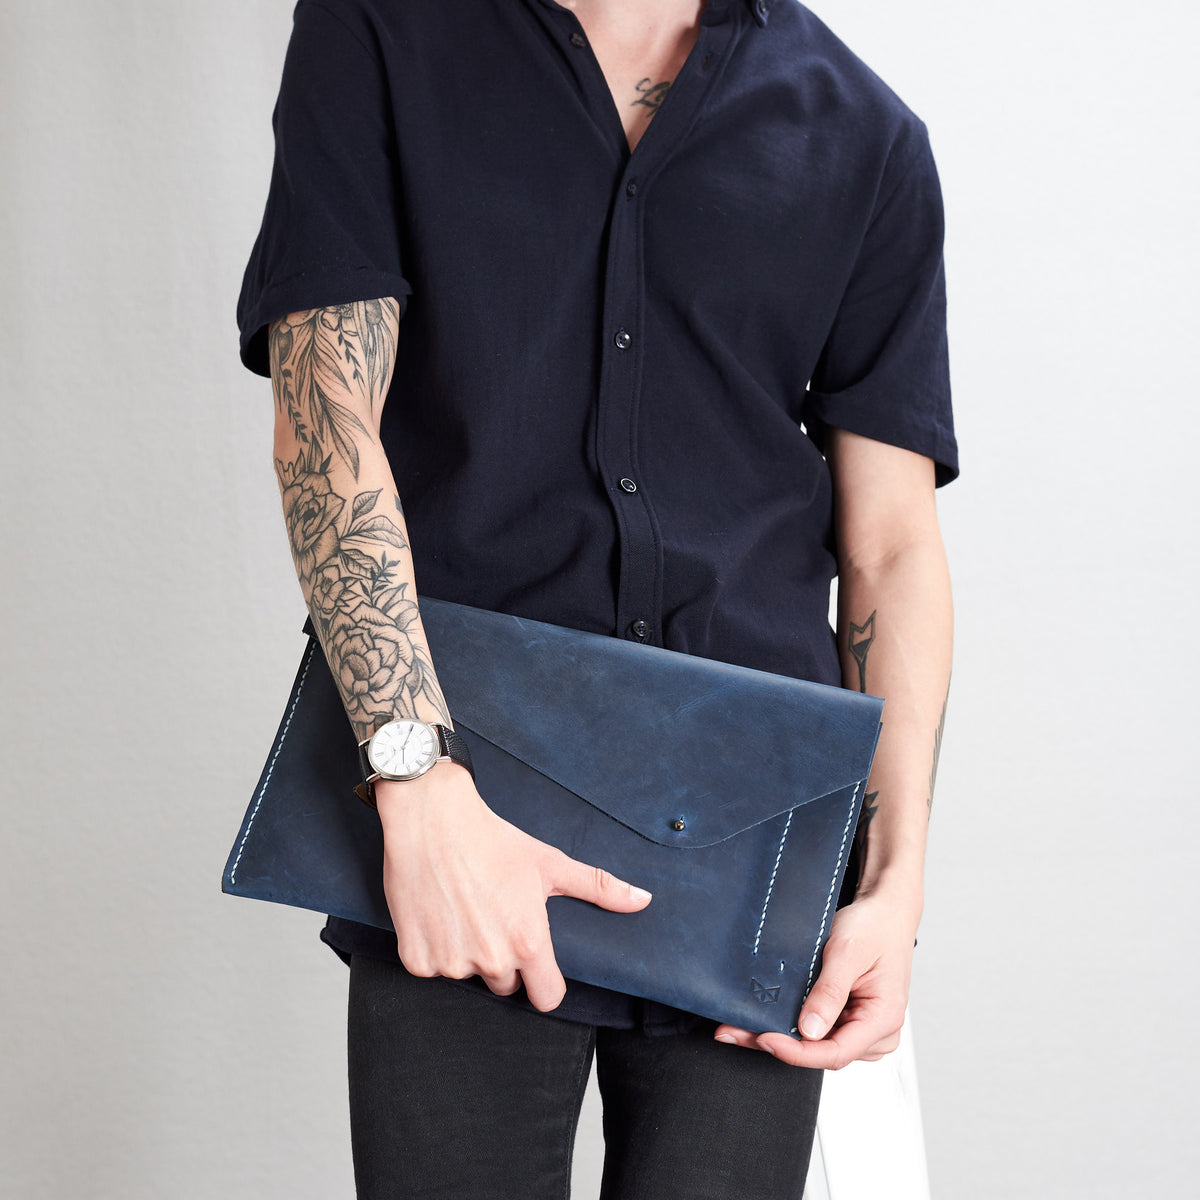 Style Front View. iPad Sleeve. iPad Leather Case Navy With Apple Pencil Holder by Capra Leather